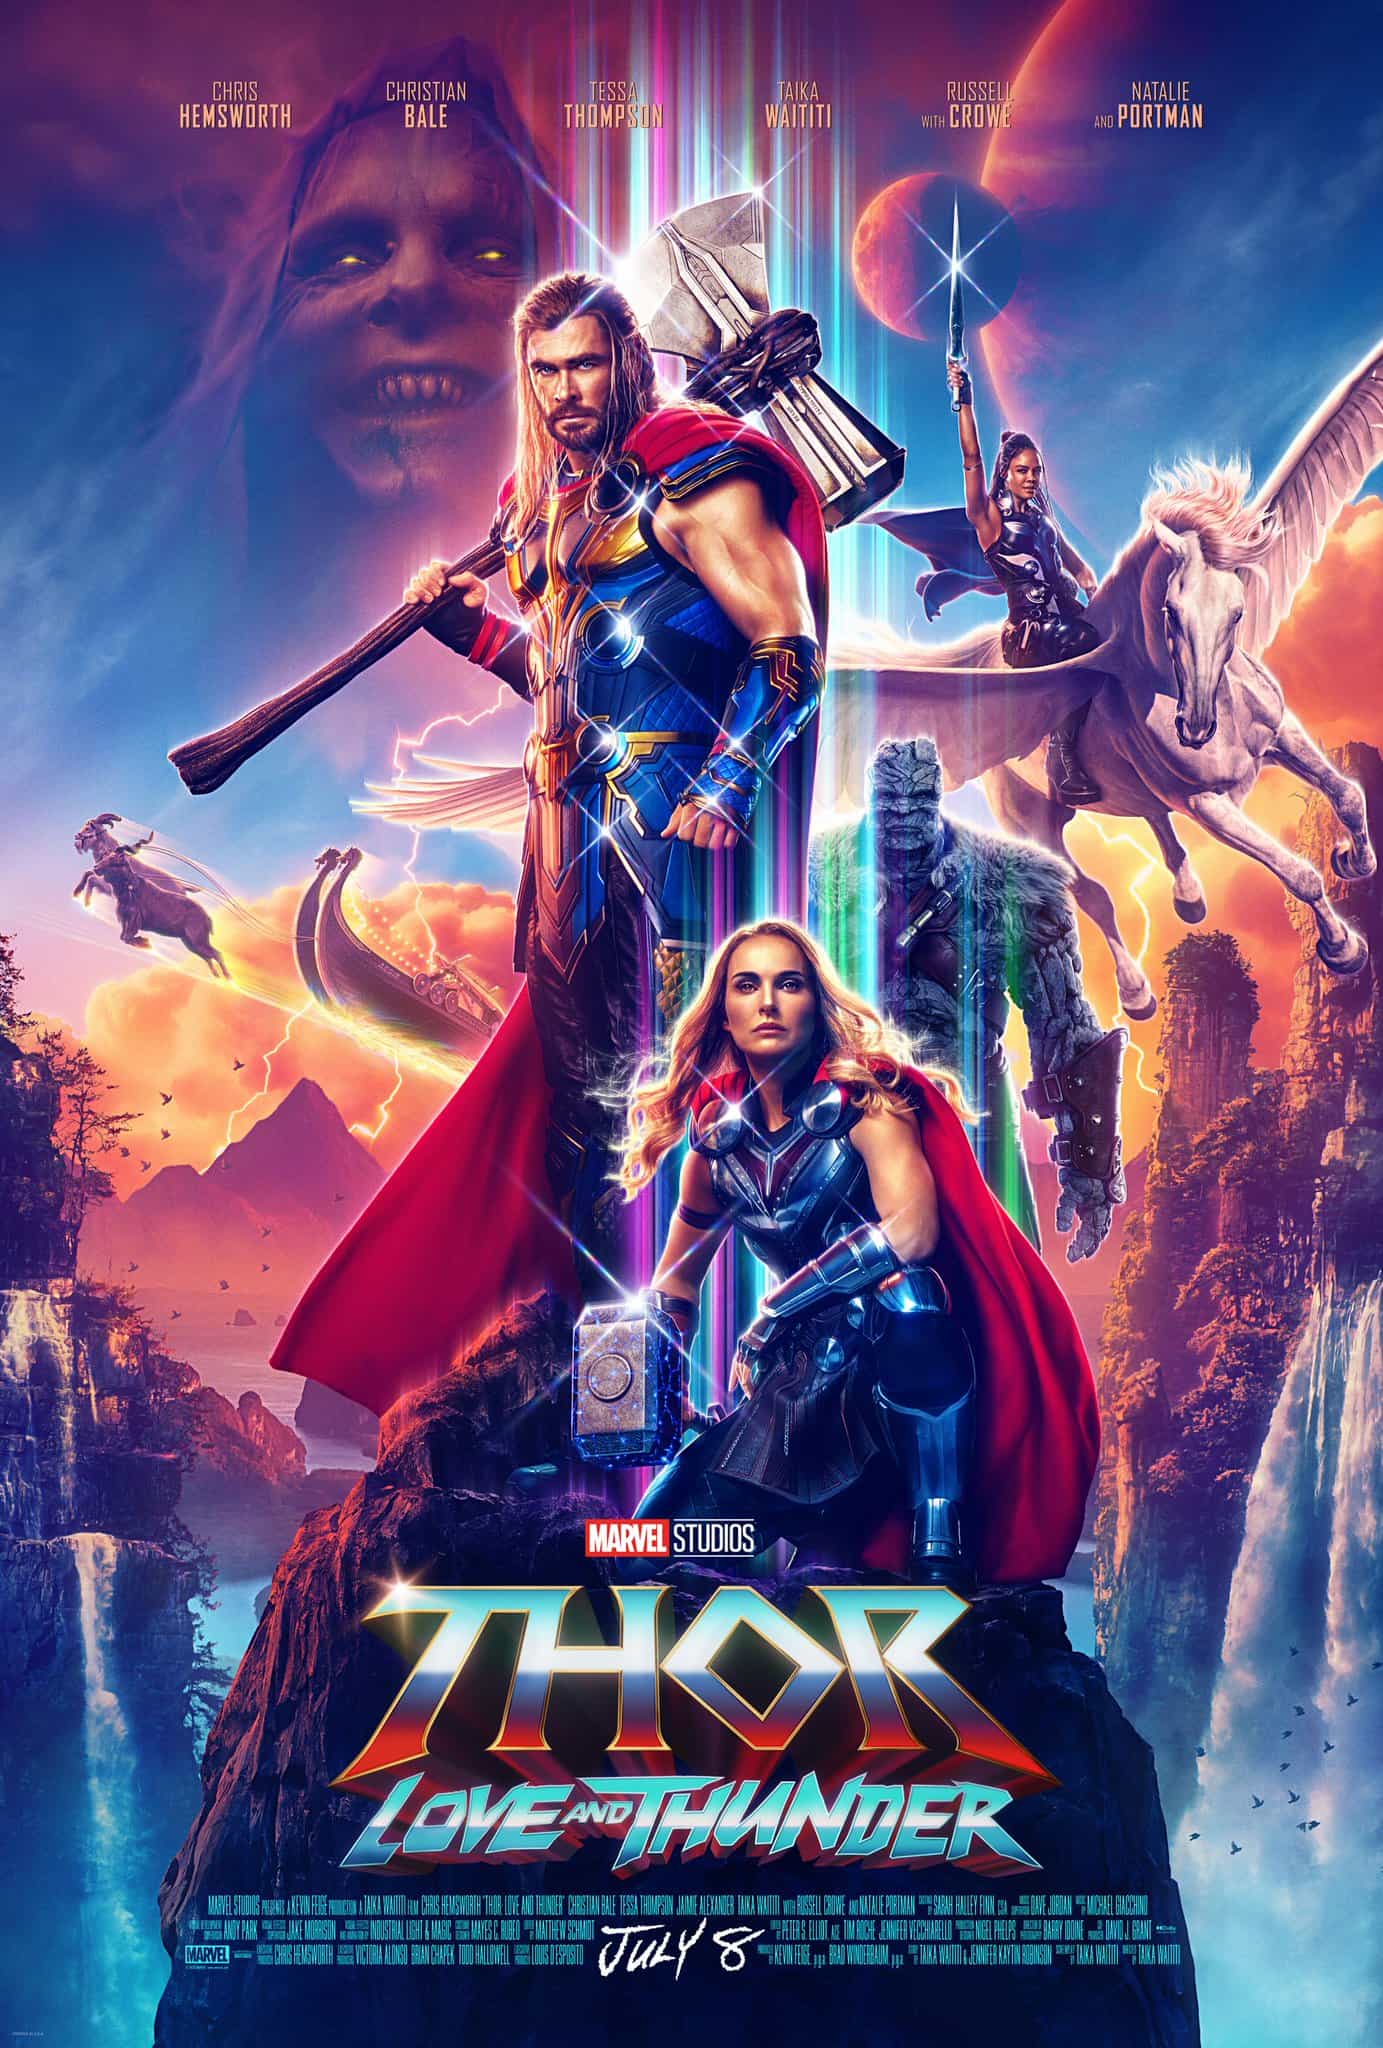 UK Box Office Weekend Report 8th - 10th July 2022: Thor 4 hits the top on its debut weekend with over £12 Million